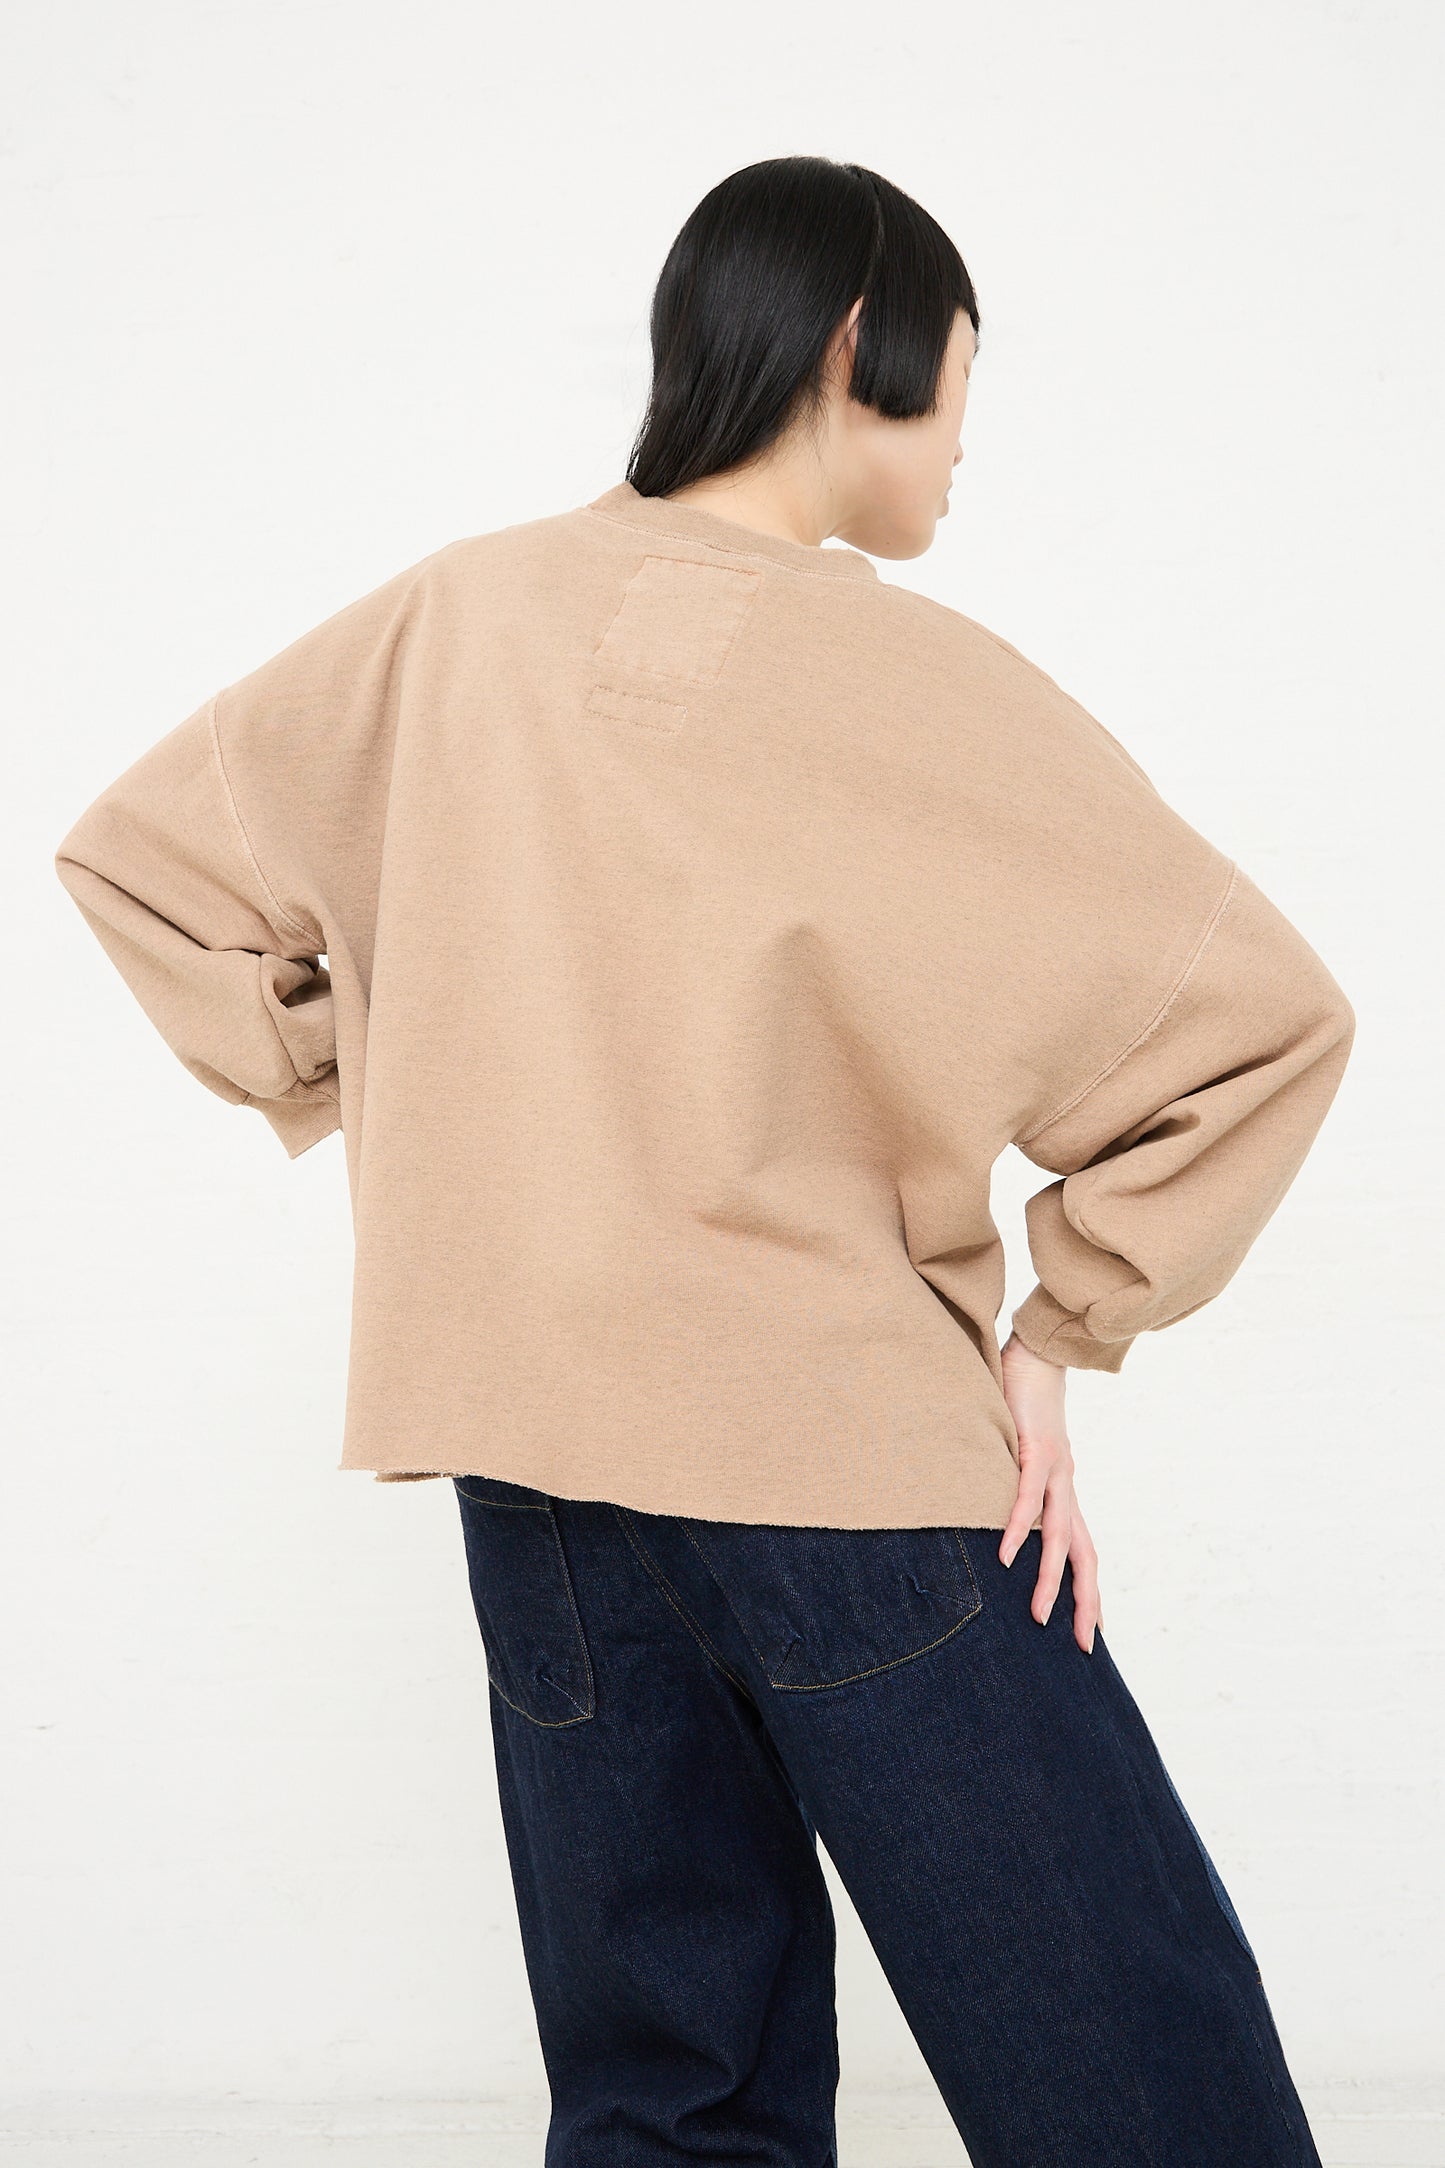 Person in oversized, distressed Rachel Comey Fond Sweatshirt in Hazelnut and blue jeans standing with back to the camera against a white background.